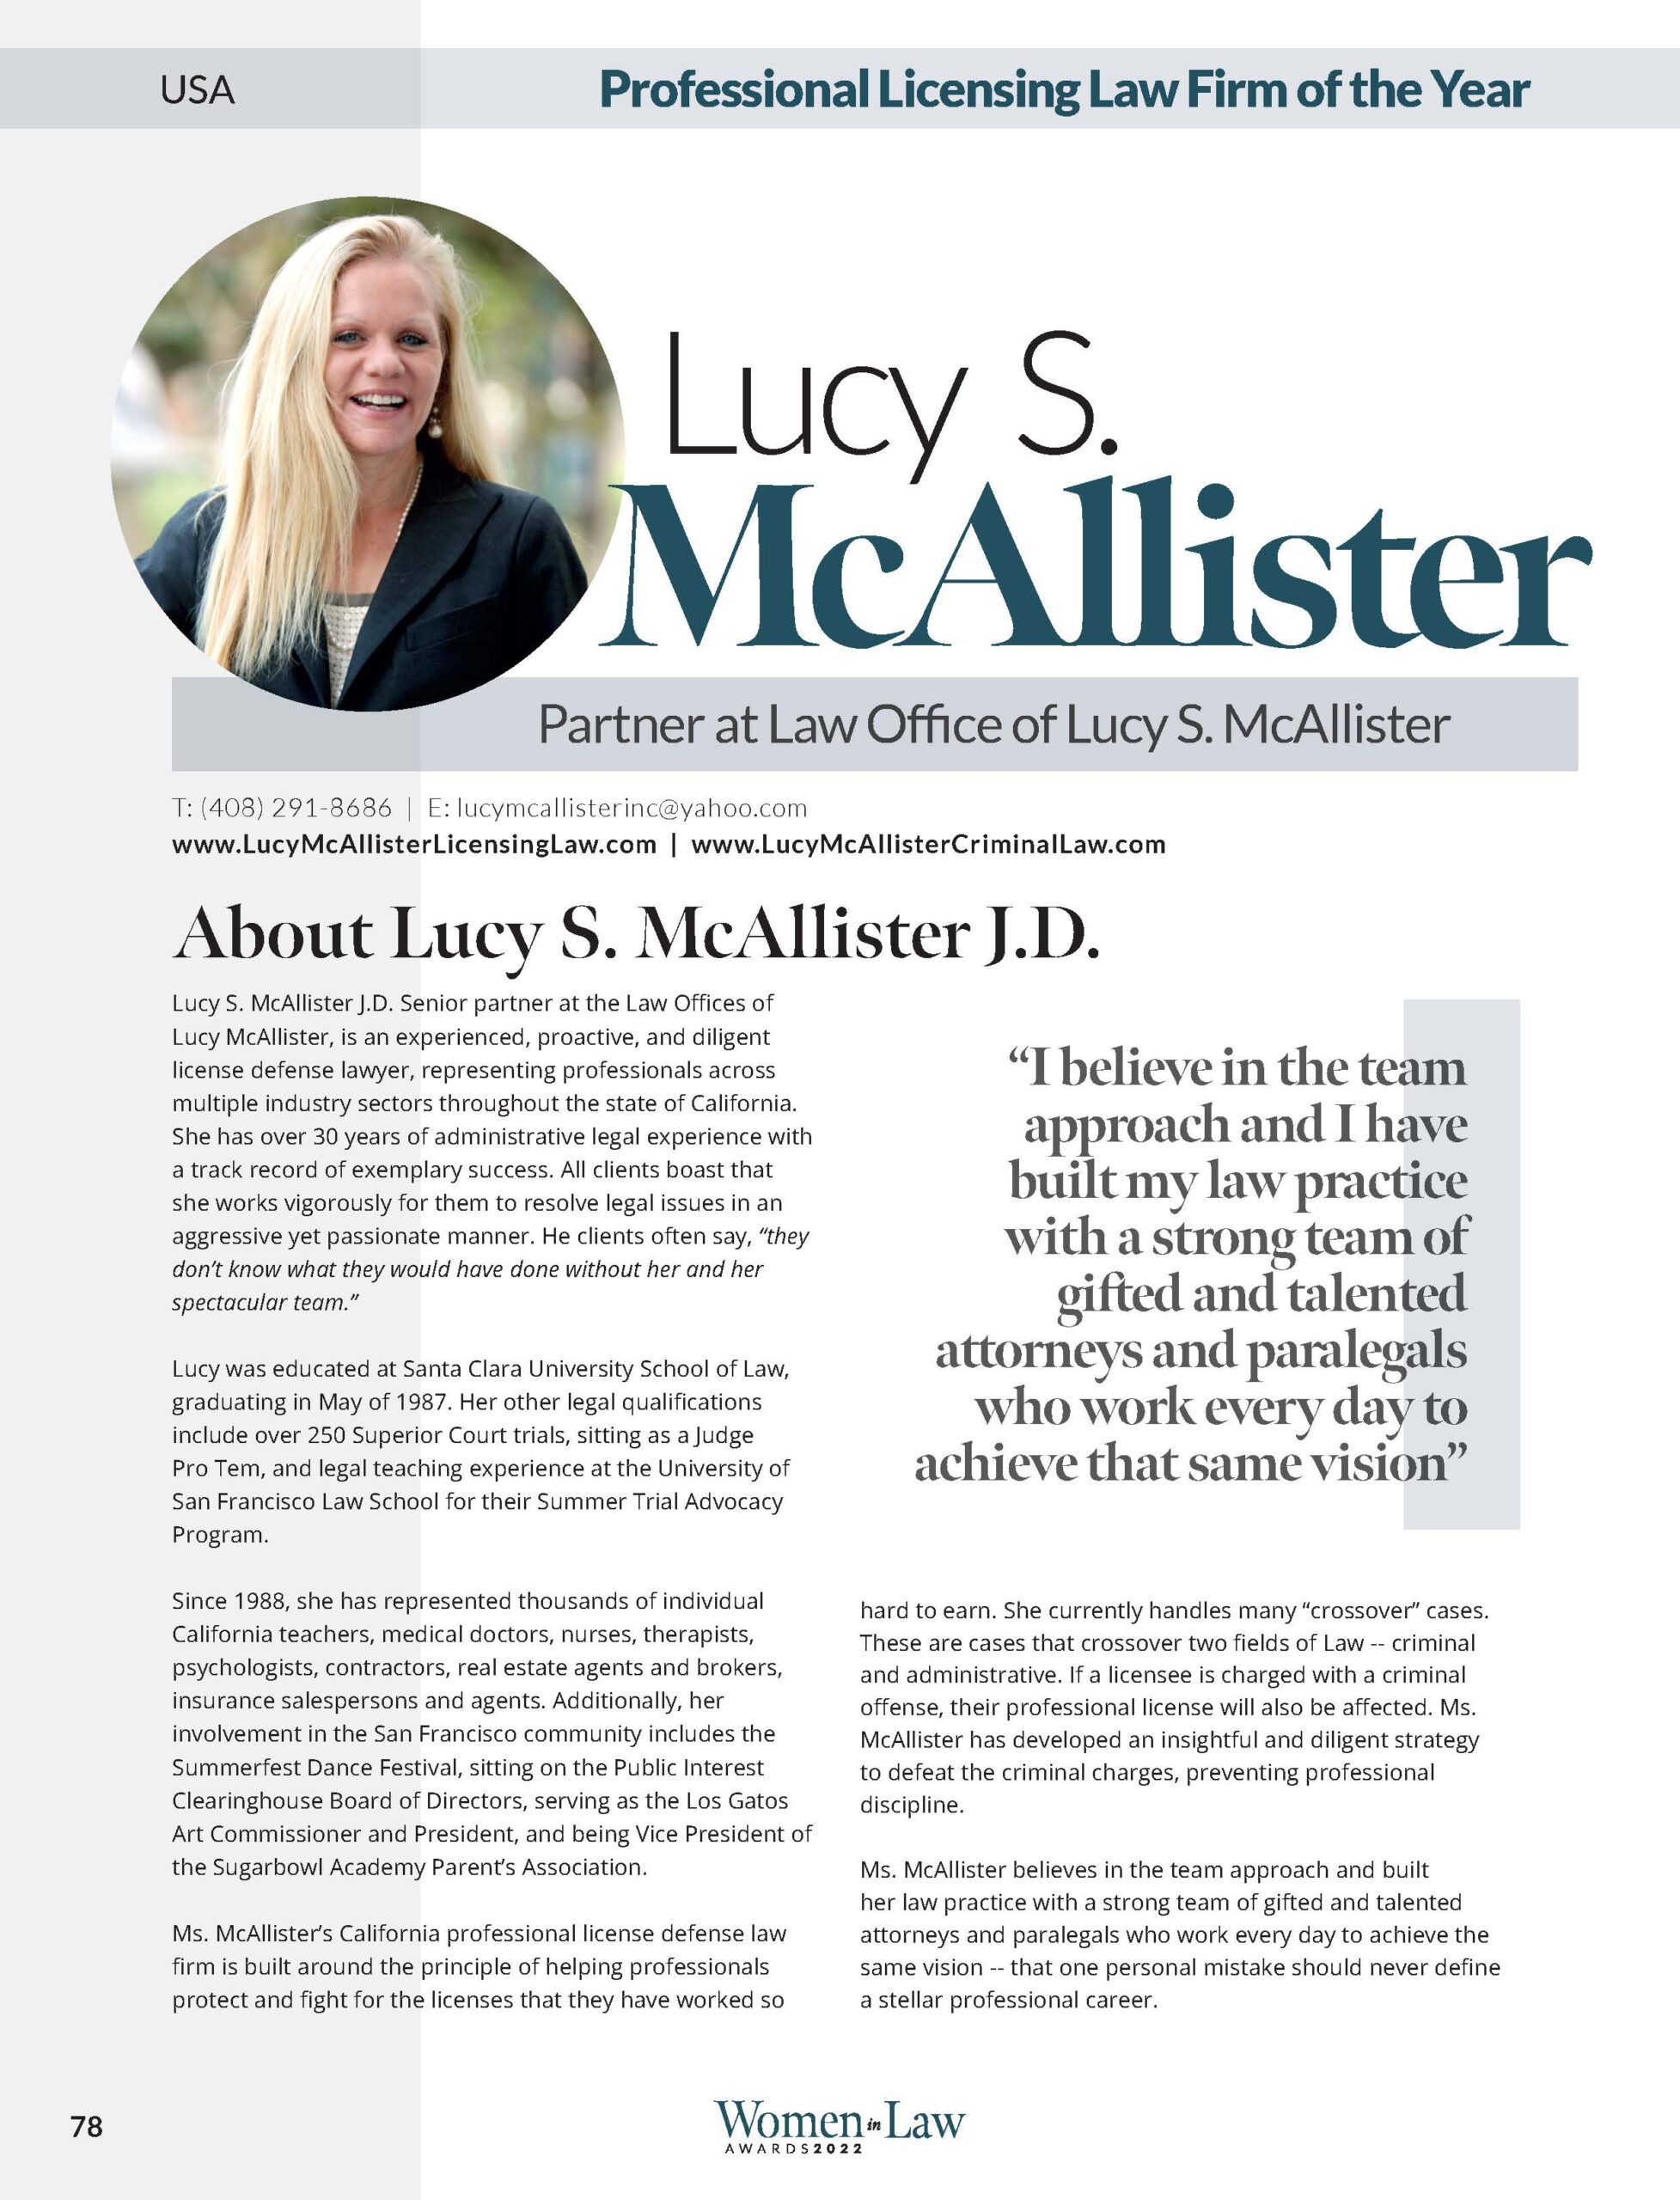 Lawyer Monthly Women In Law Awards 2022 Law Offices of Lucy McAllister is Professional Licensing Law Firm of the Year